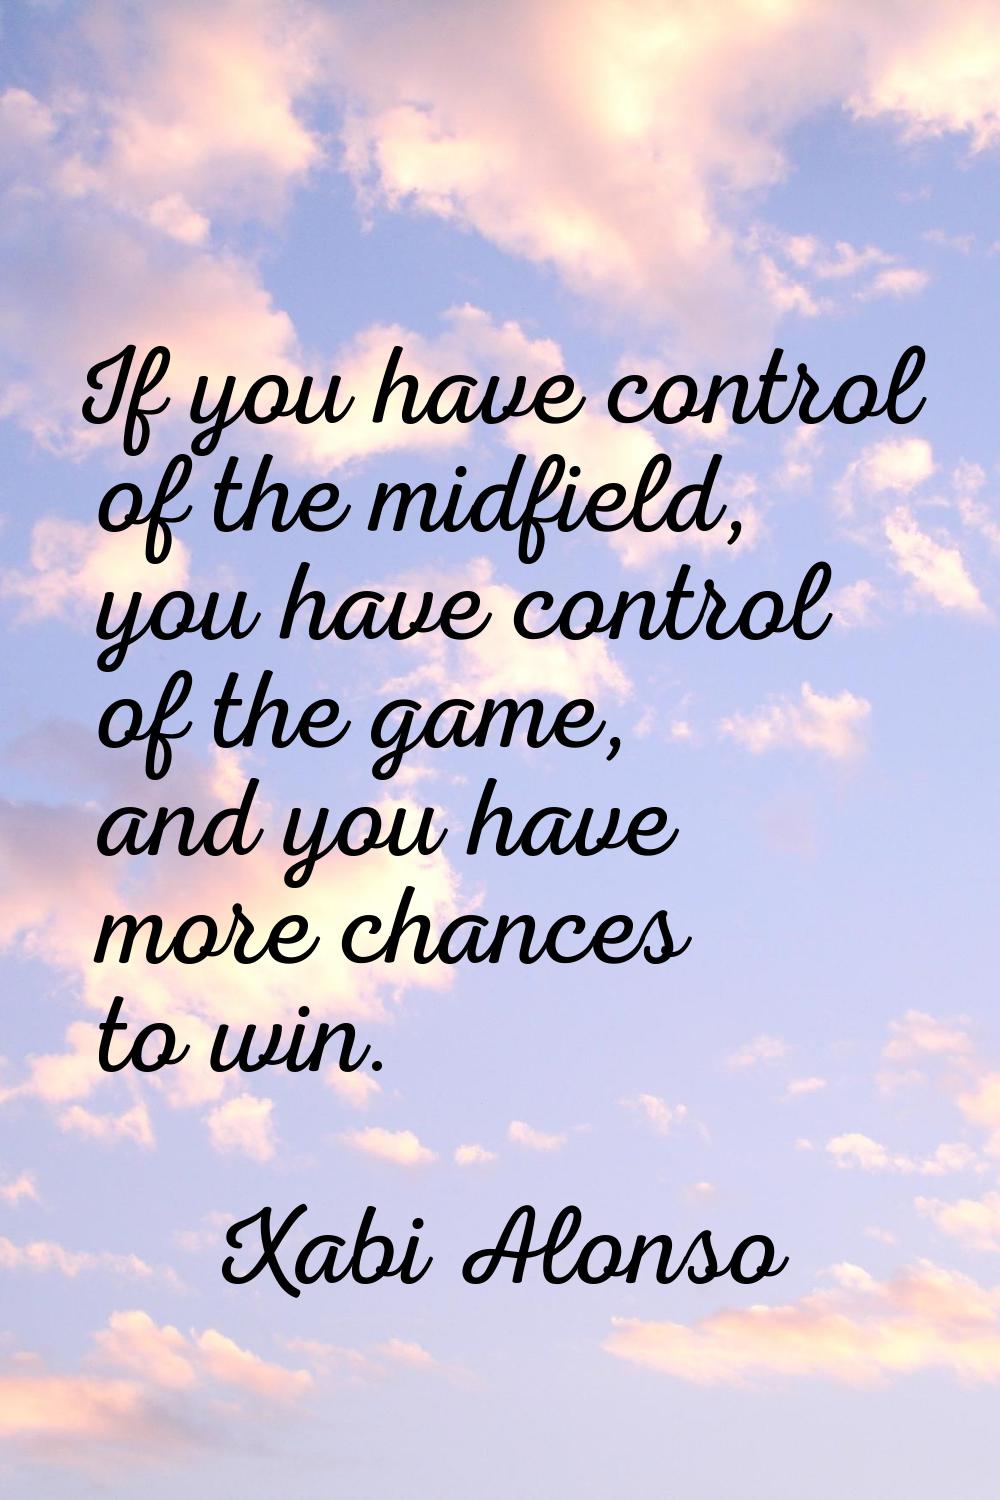 If you have control of the midfield, you have control of the game, and you have more chances to win